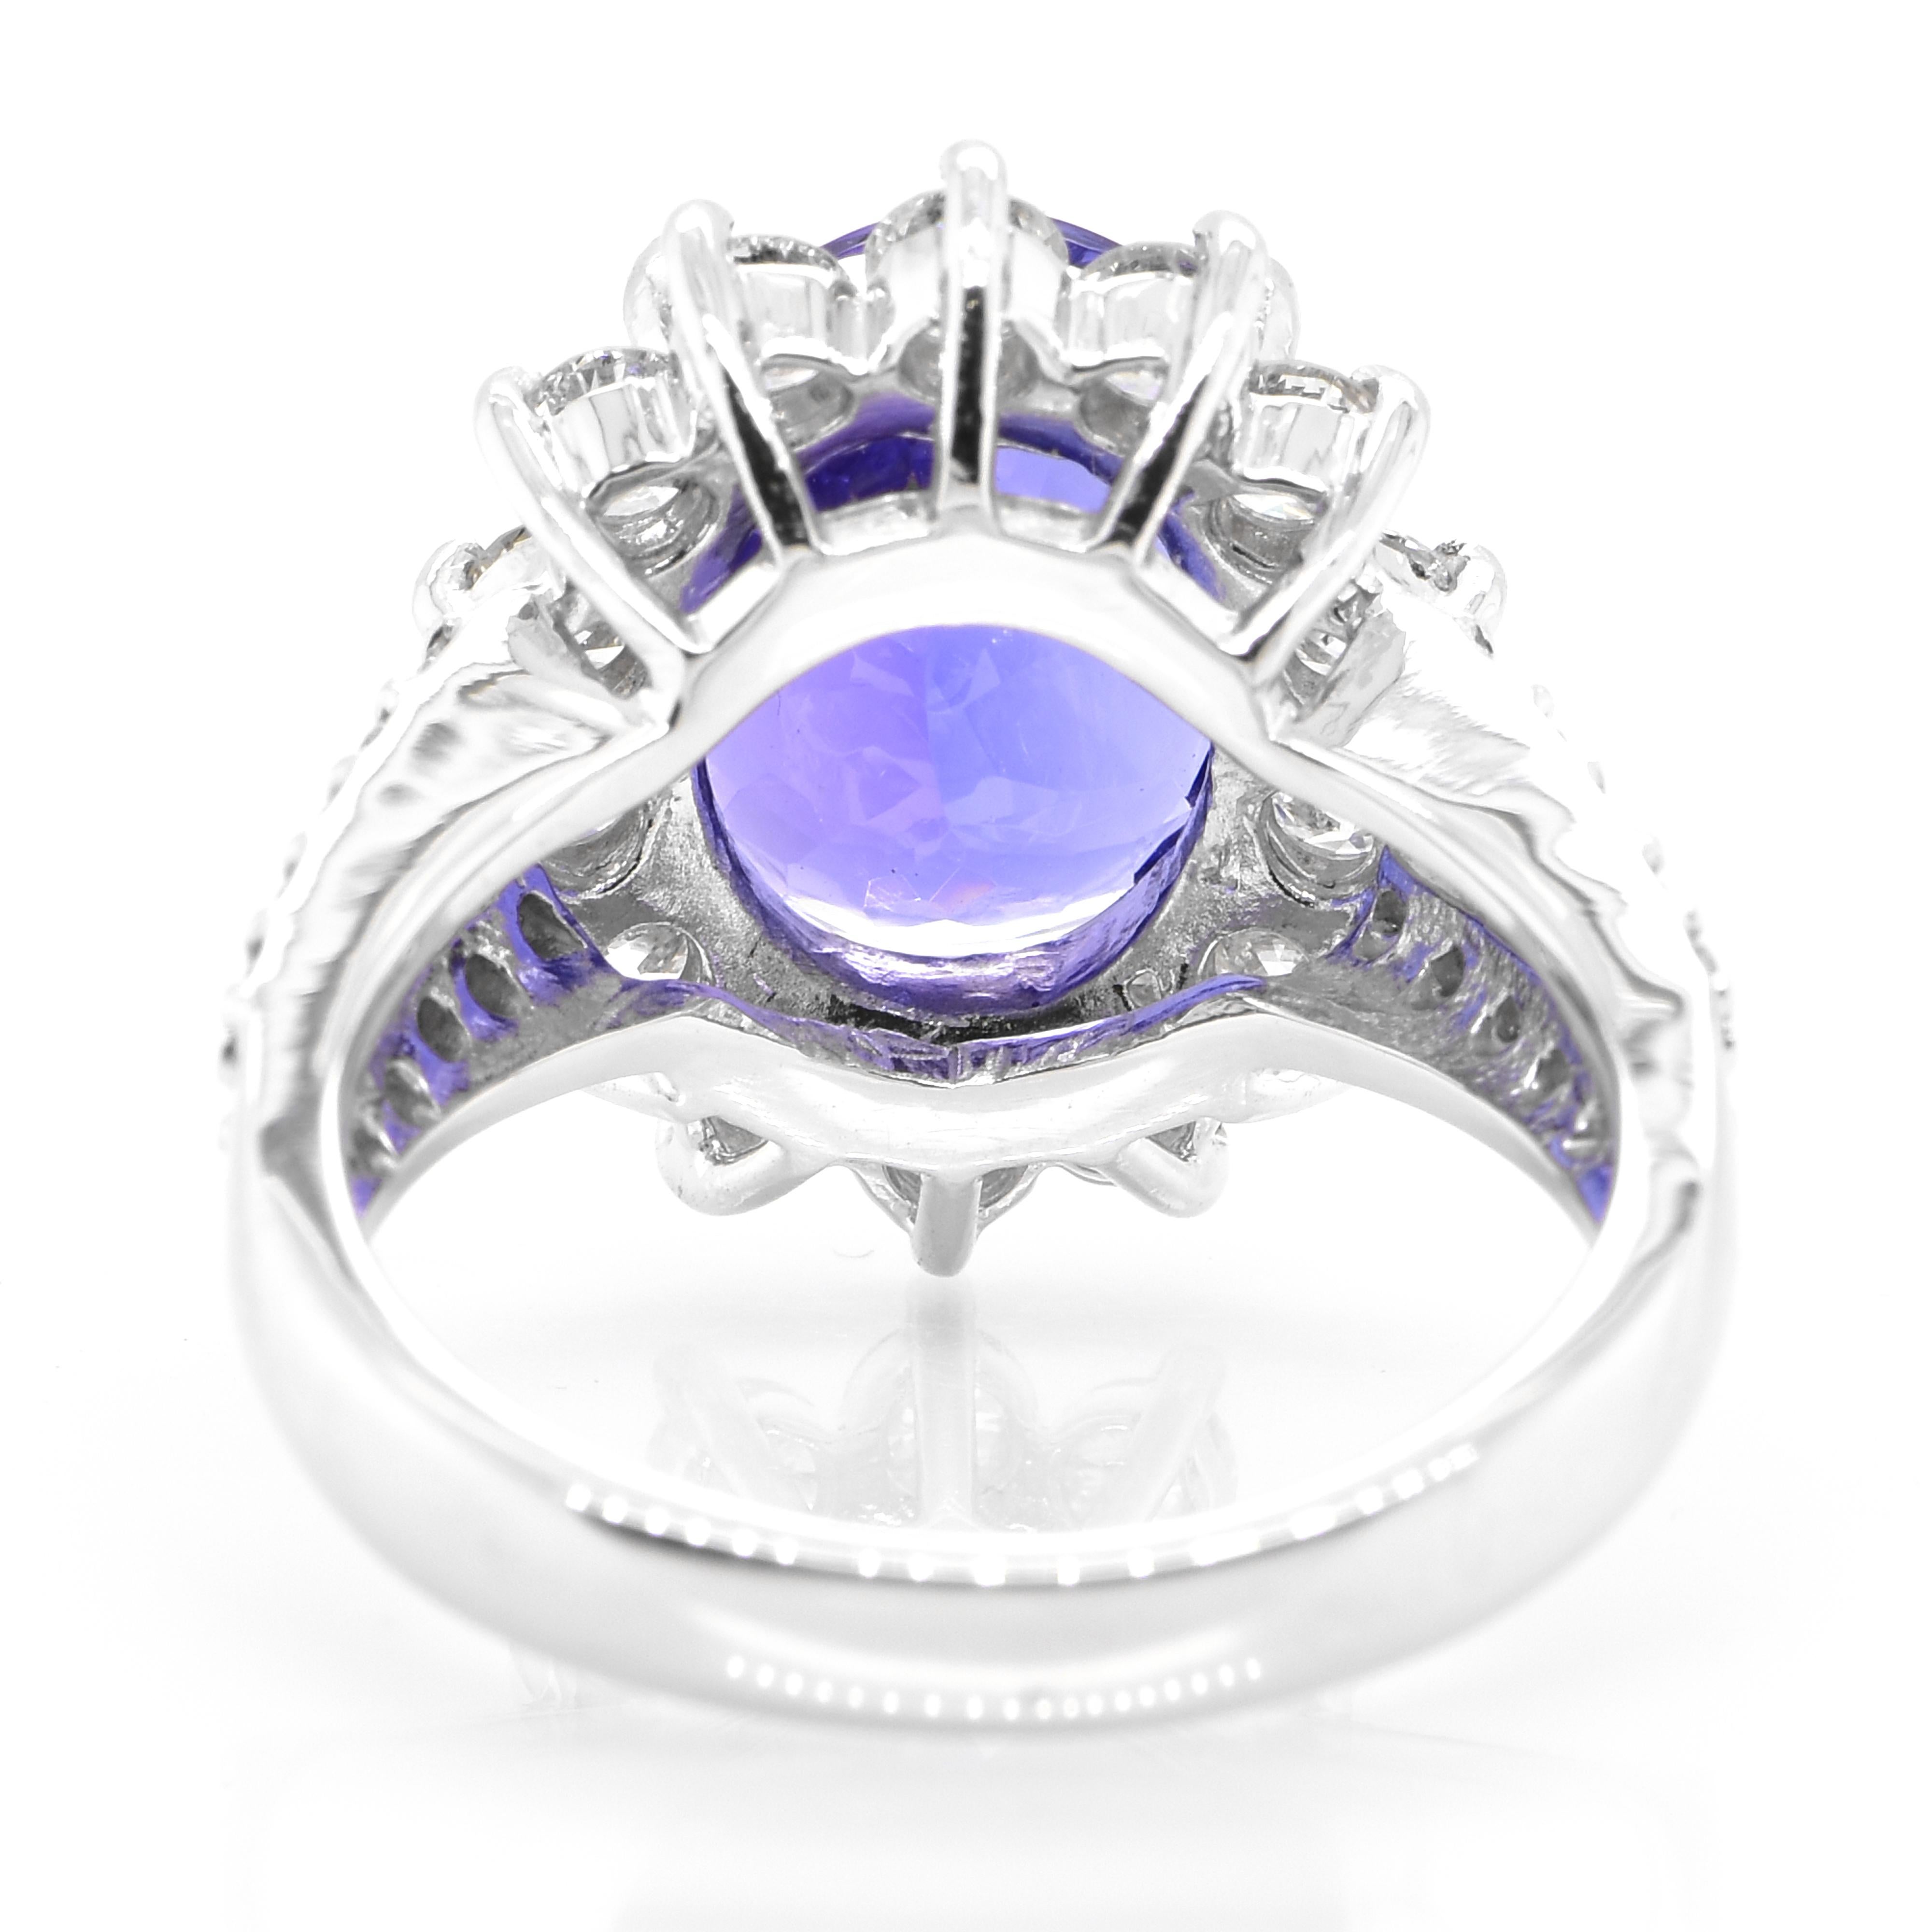 Women's 4.75 Carat Natural Tanzanite and Diamond Cocktail Ring Set in Platinum For Sale